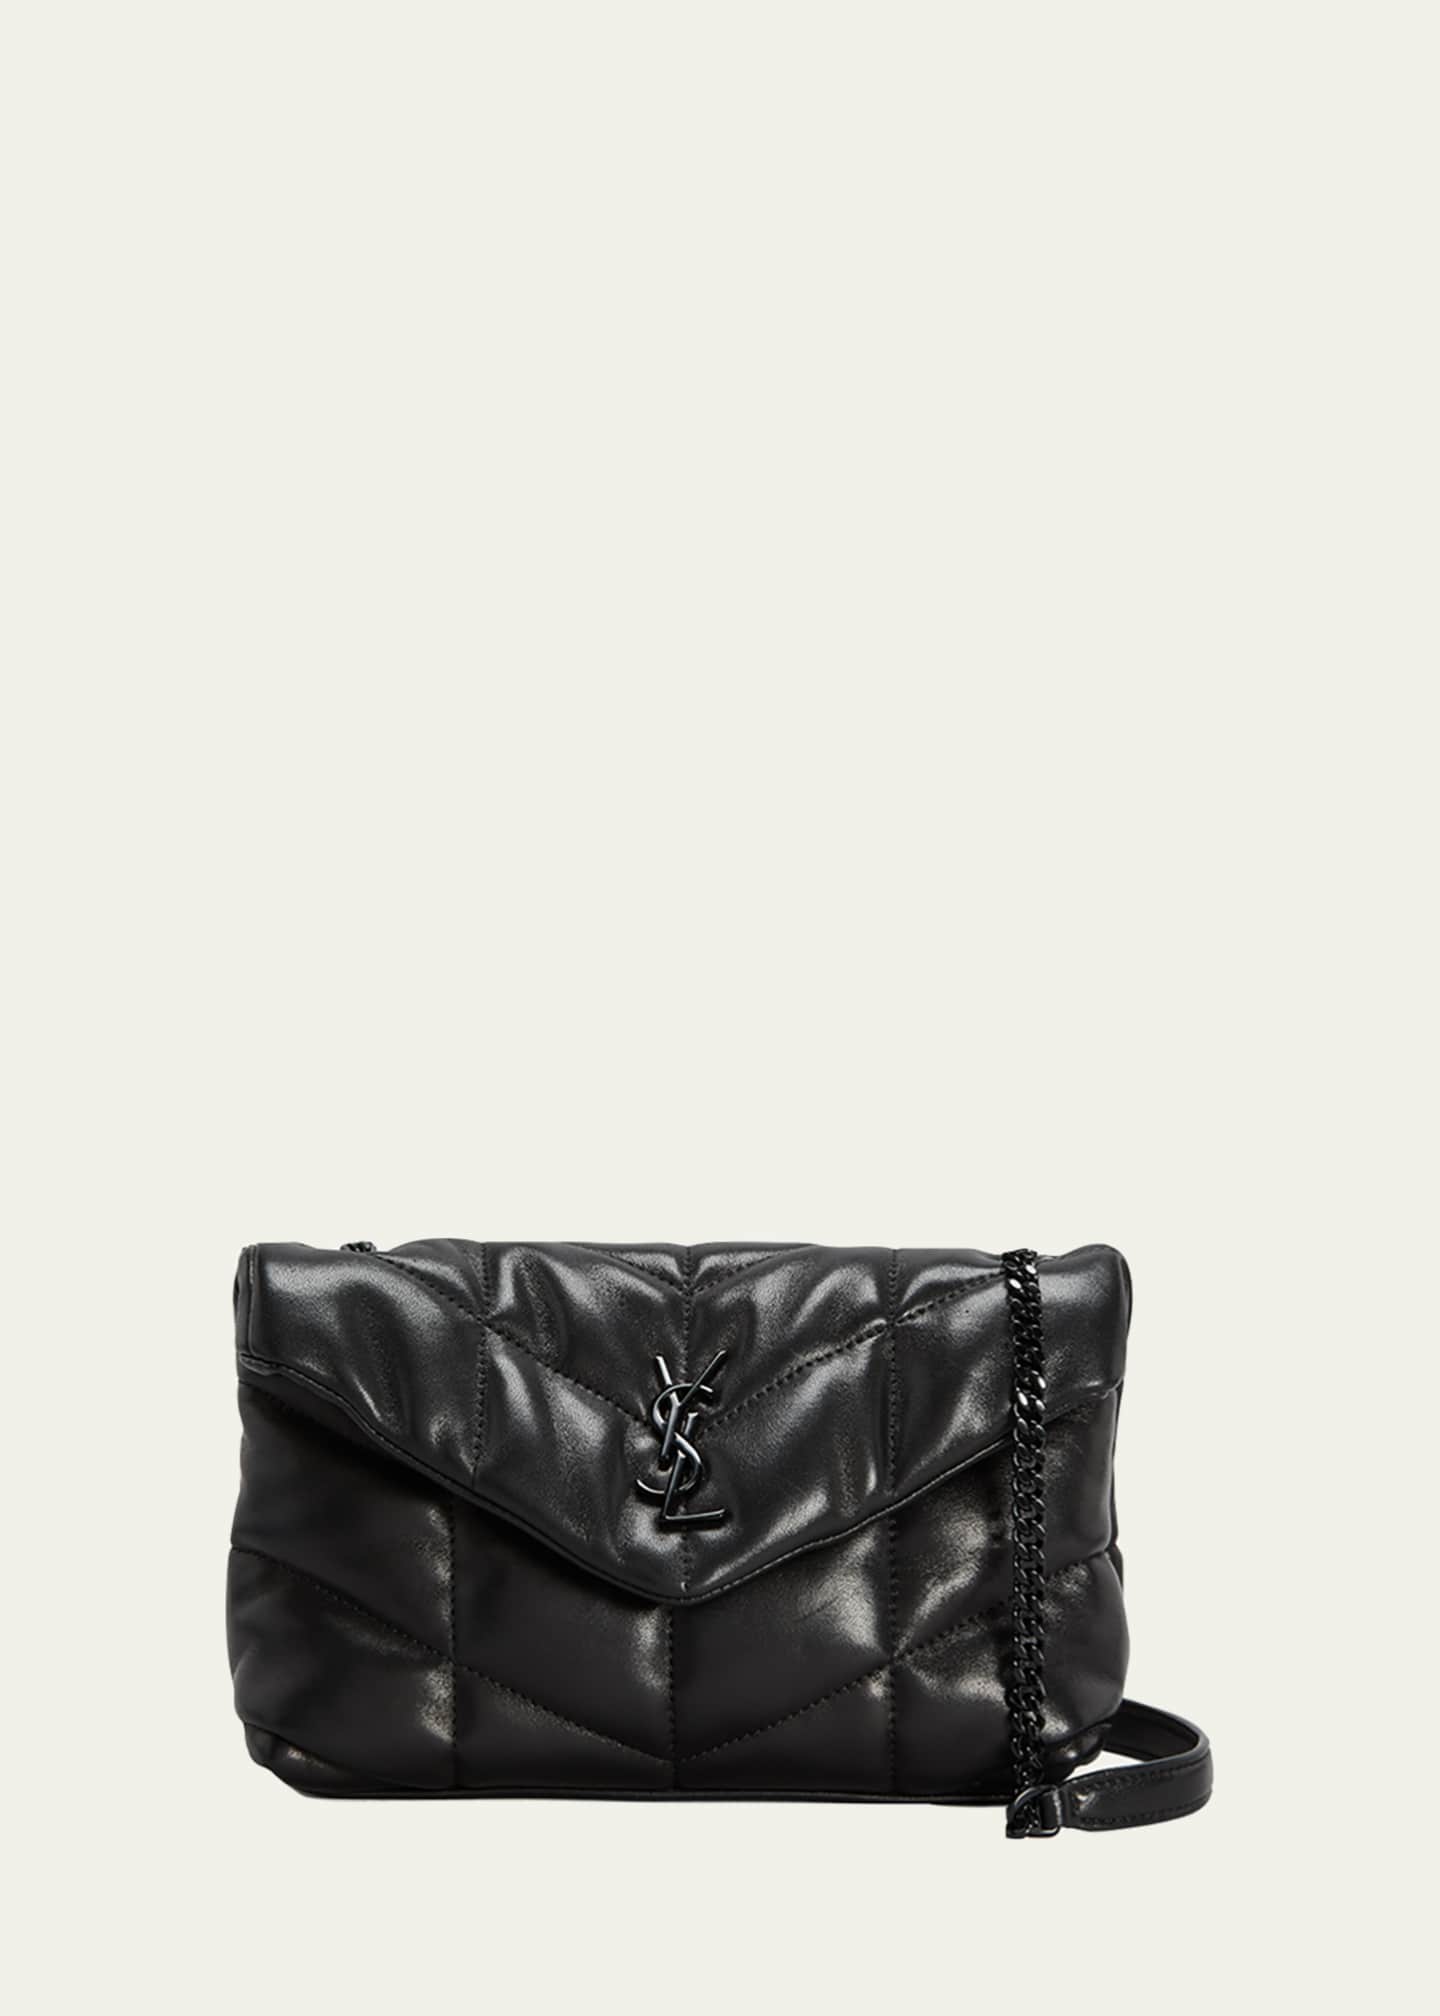 Saint Laurent Loulou Toy Puffer Leather Crossbody Bag